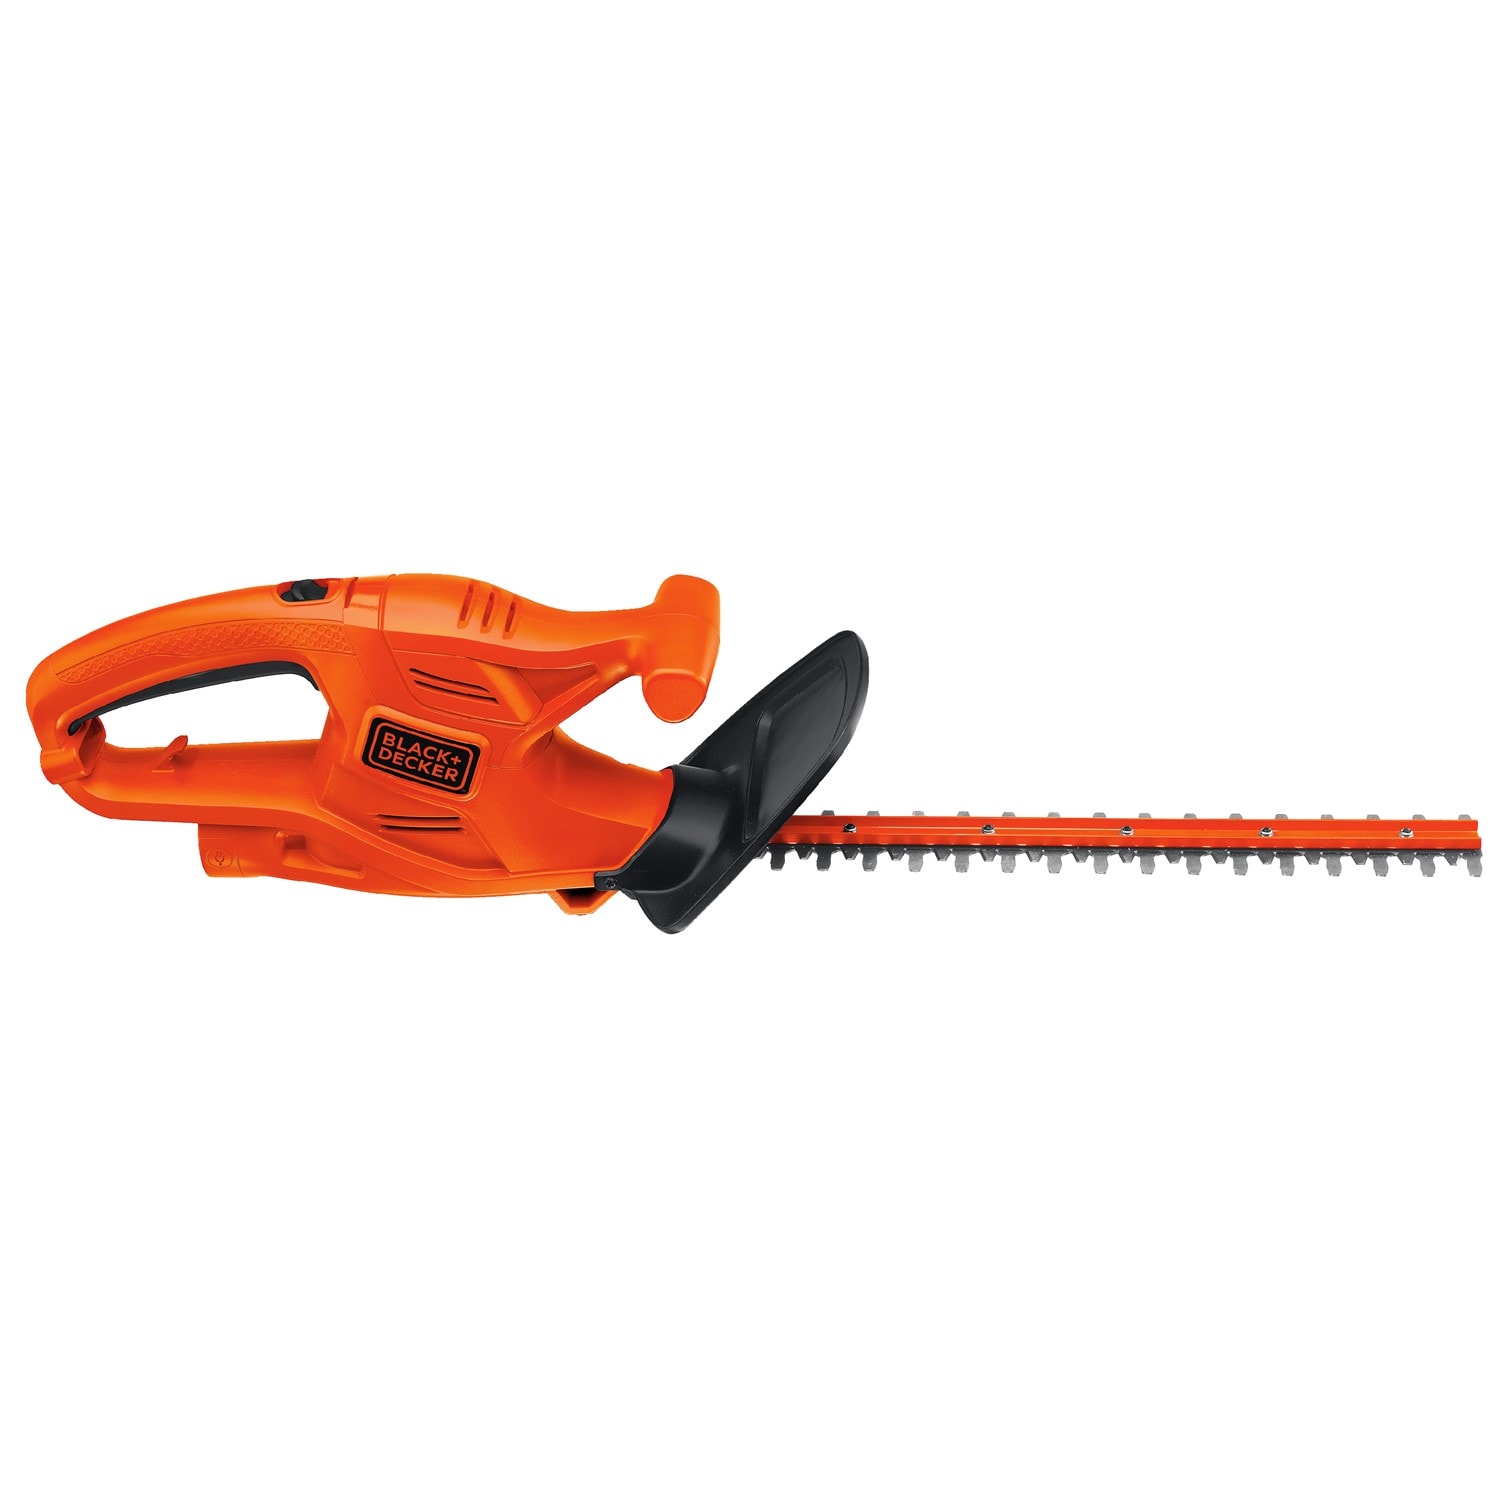 Black & Decker 505b 120v 18 Auto Stop Hedge Trimmer for Sale in